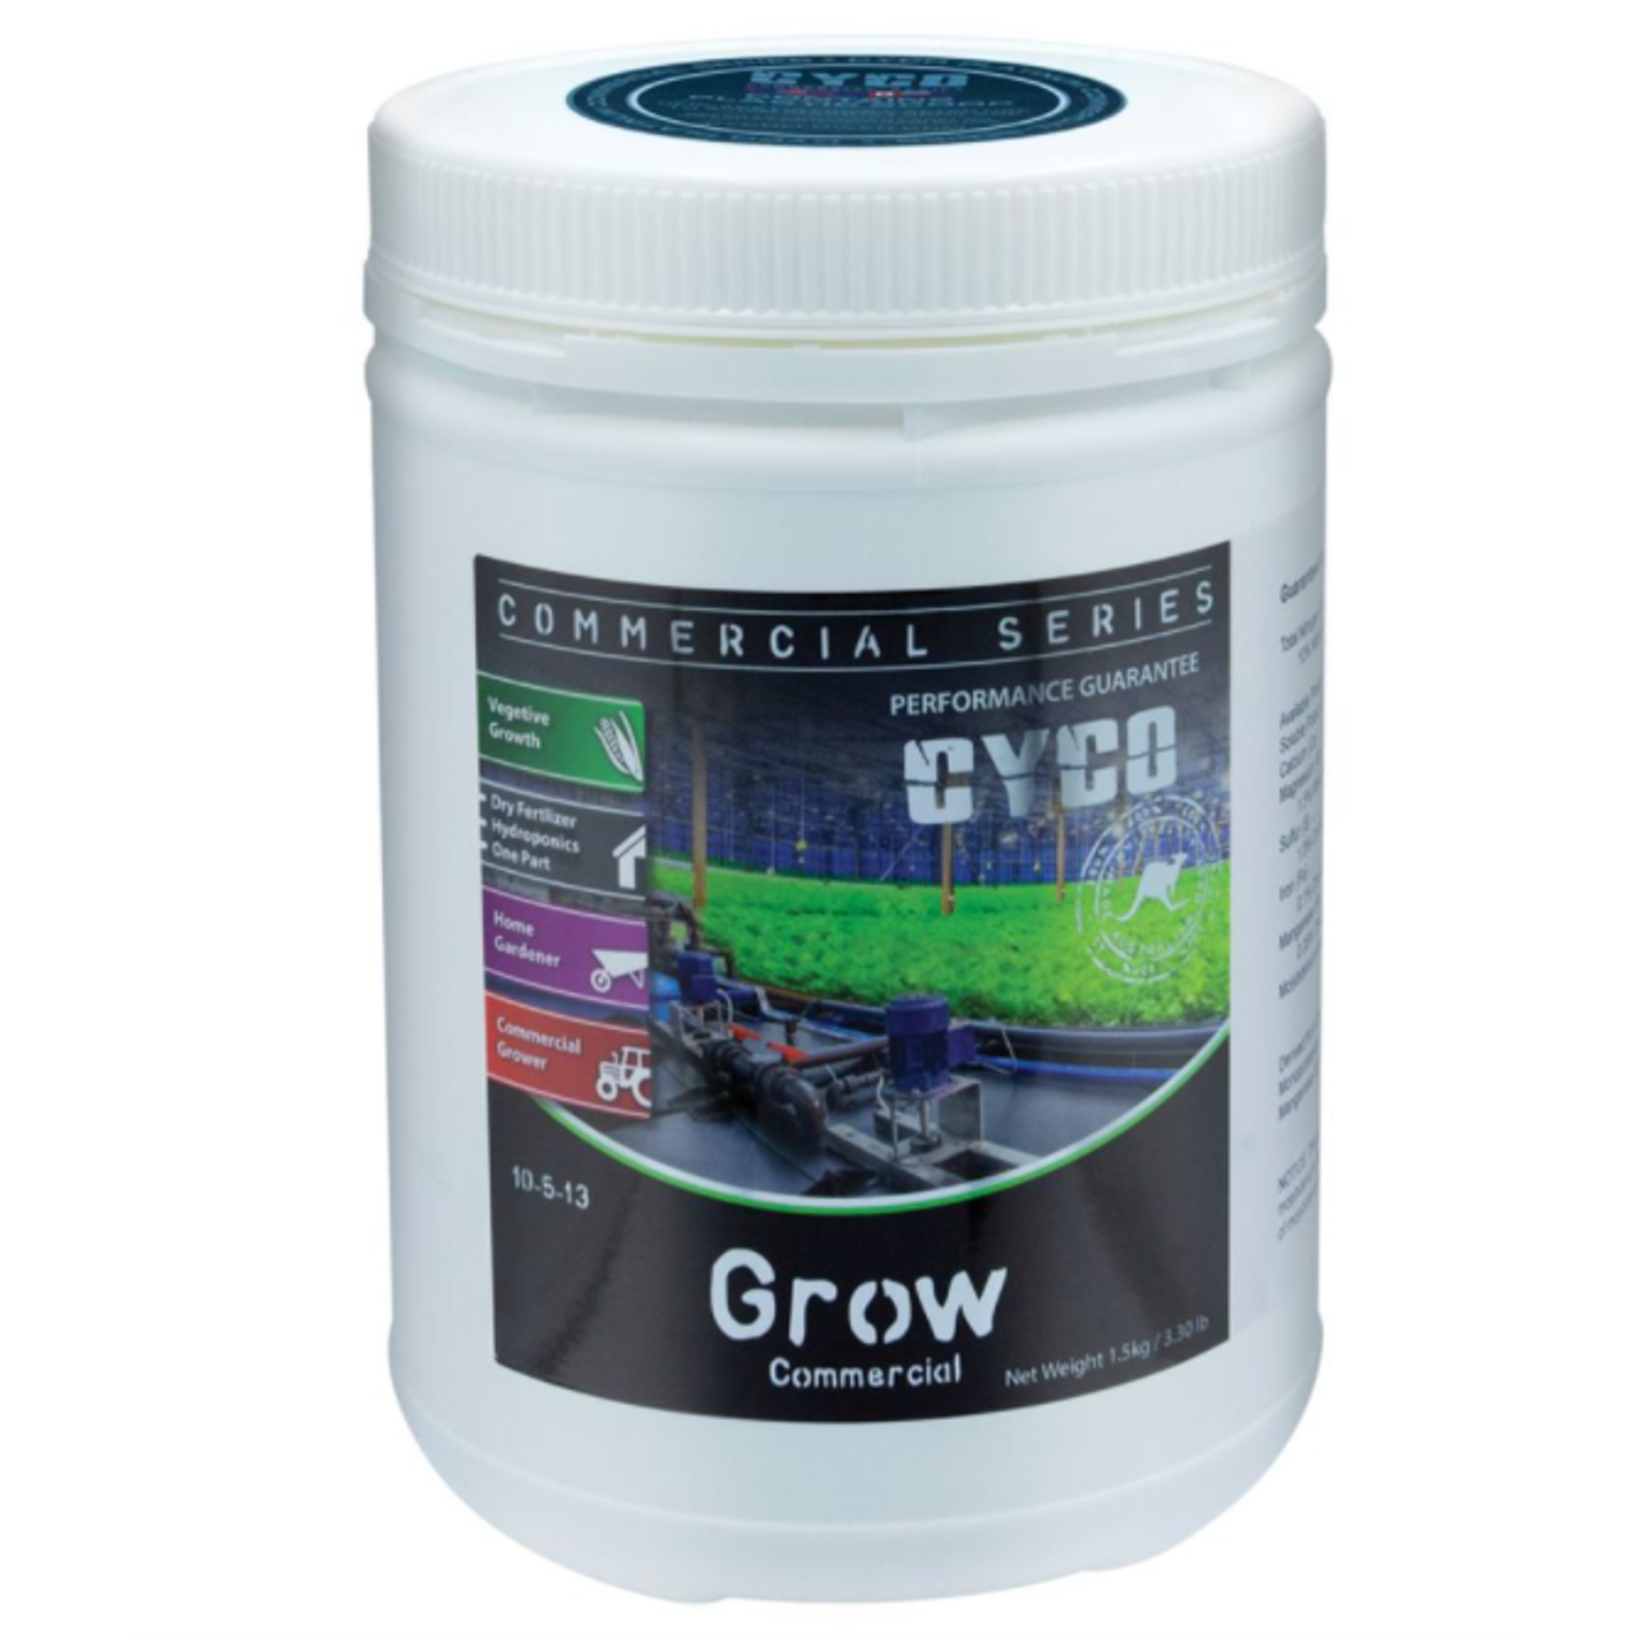 CYCO Commercial Series Grow 1.5 Kg